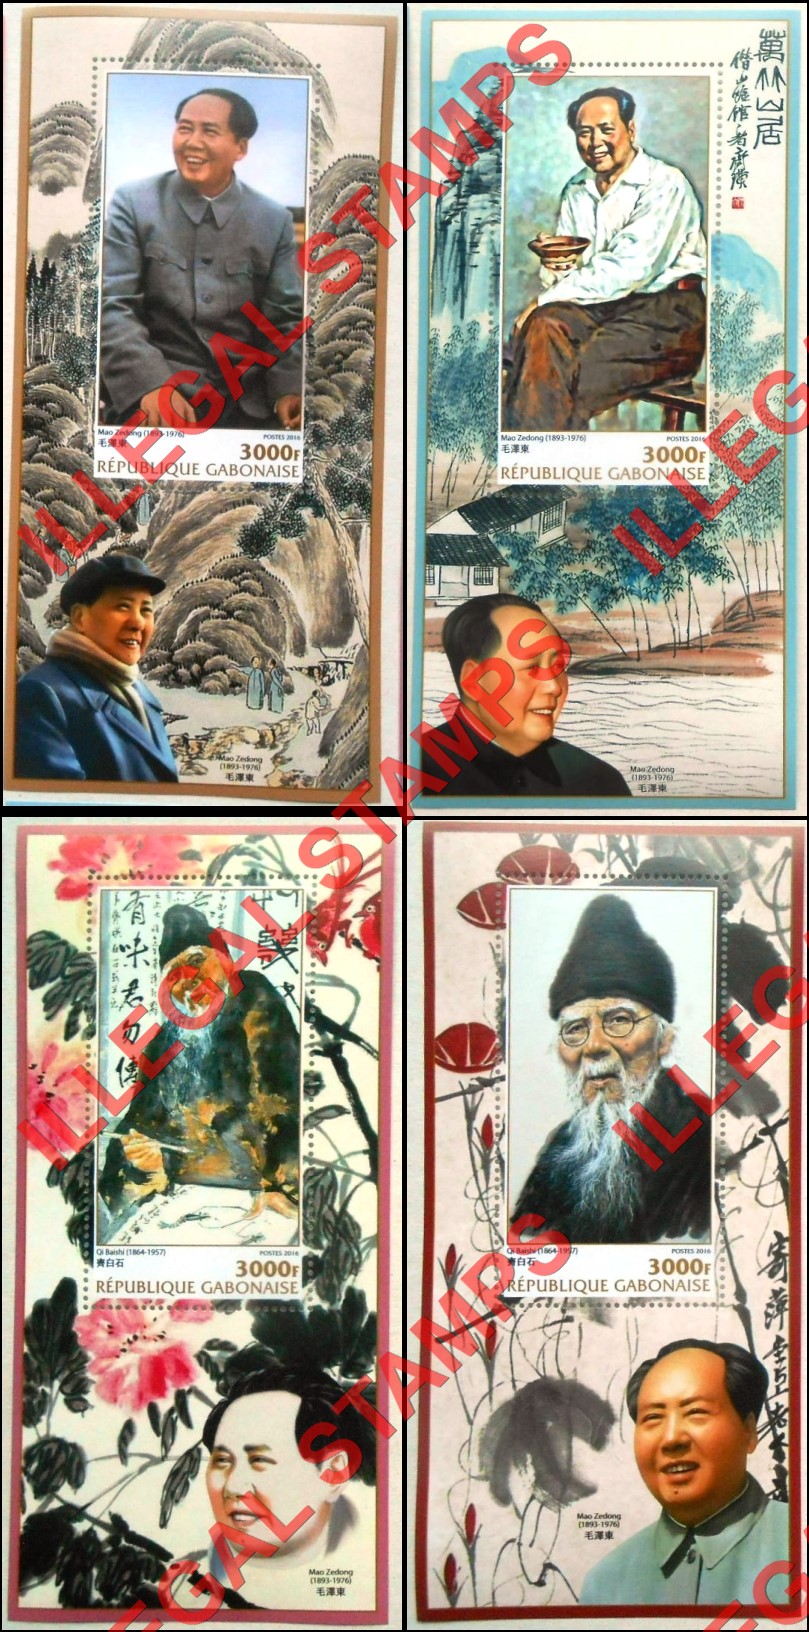 Gabon 2016 Mao Zedong and Qi Baishi Illegal Stamp Souvenir Sheets of 1 (Part 2)